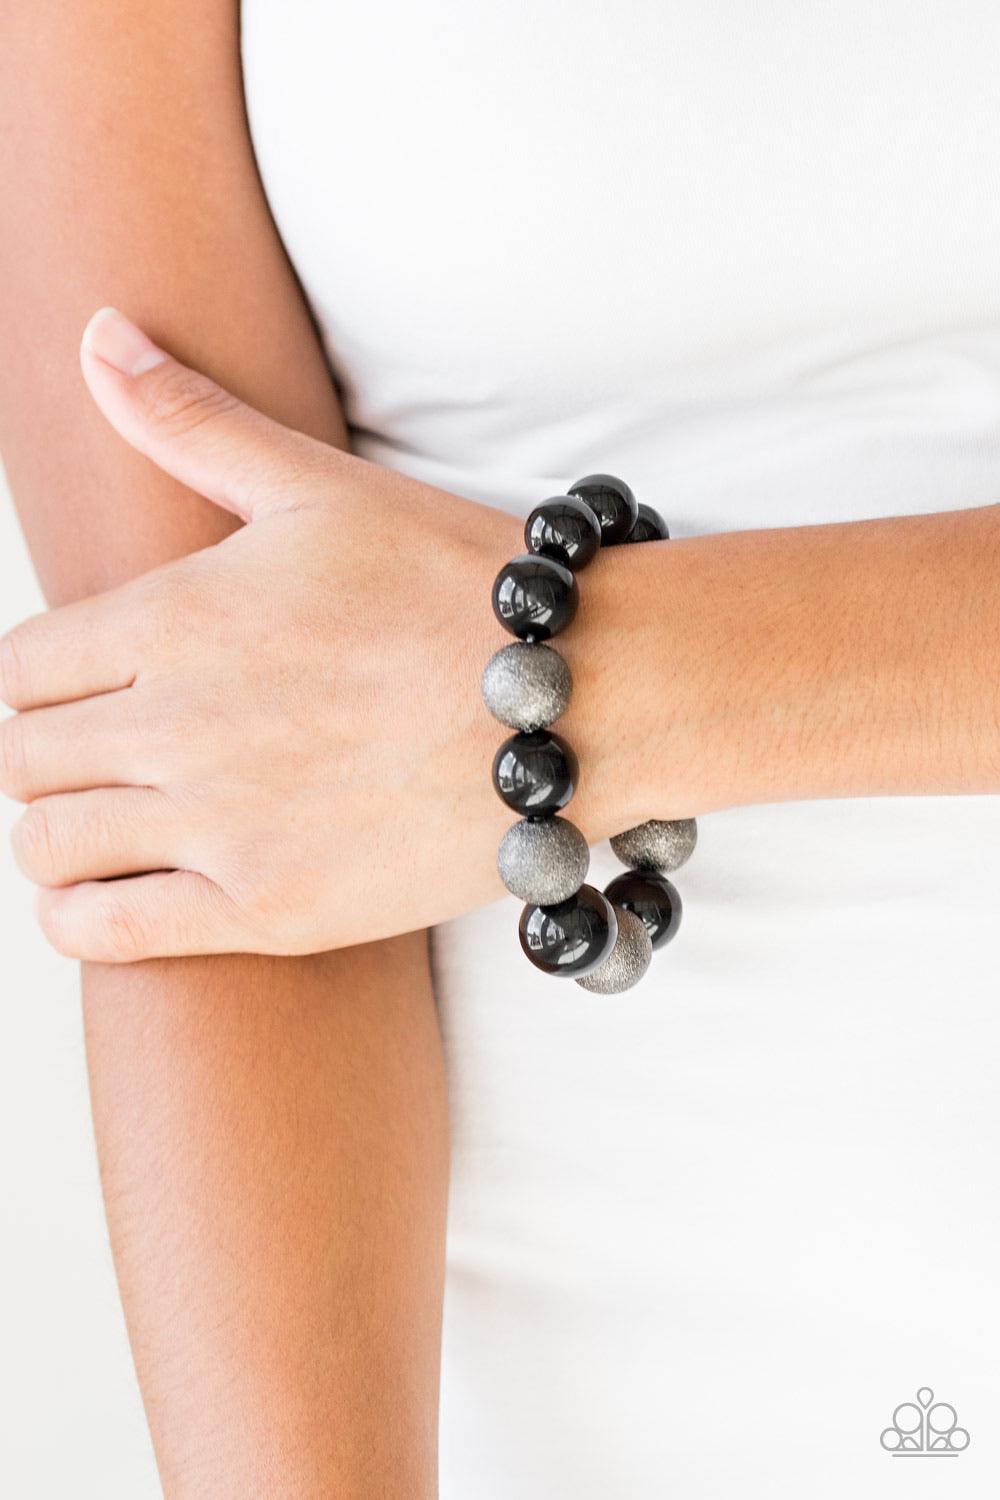 Paparazzi Accessories Humble Hustle - Black Dusted in glitter, sparkling gunmetal and shiny black beads are threaded along a stretchy band around the wrist for a glamorous look. Sold as one individual bracelet. Jewelry